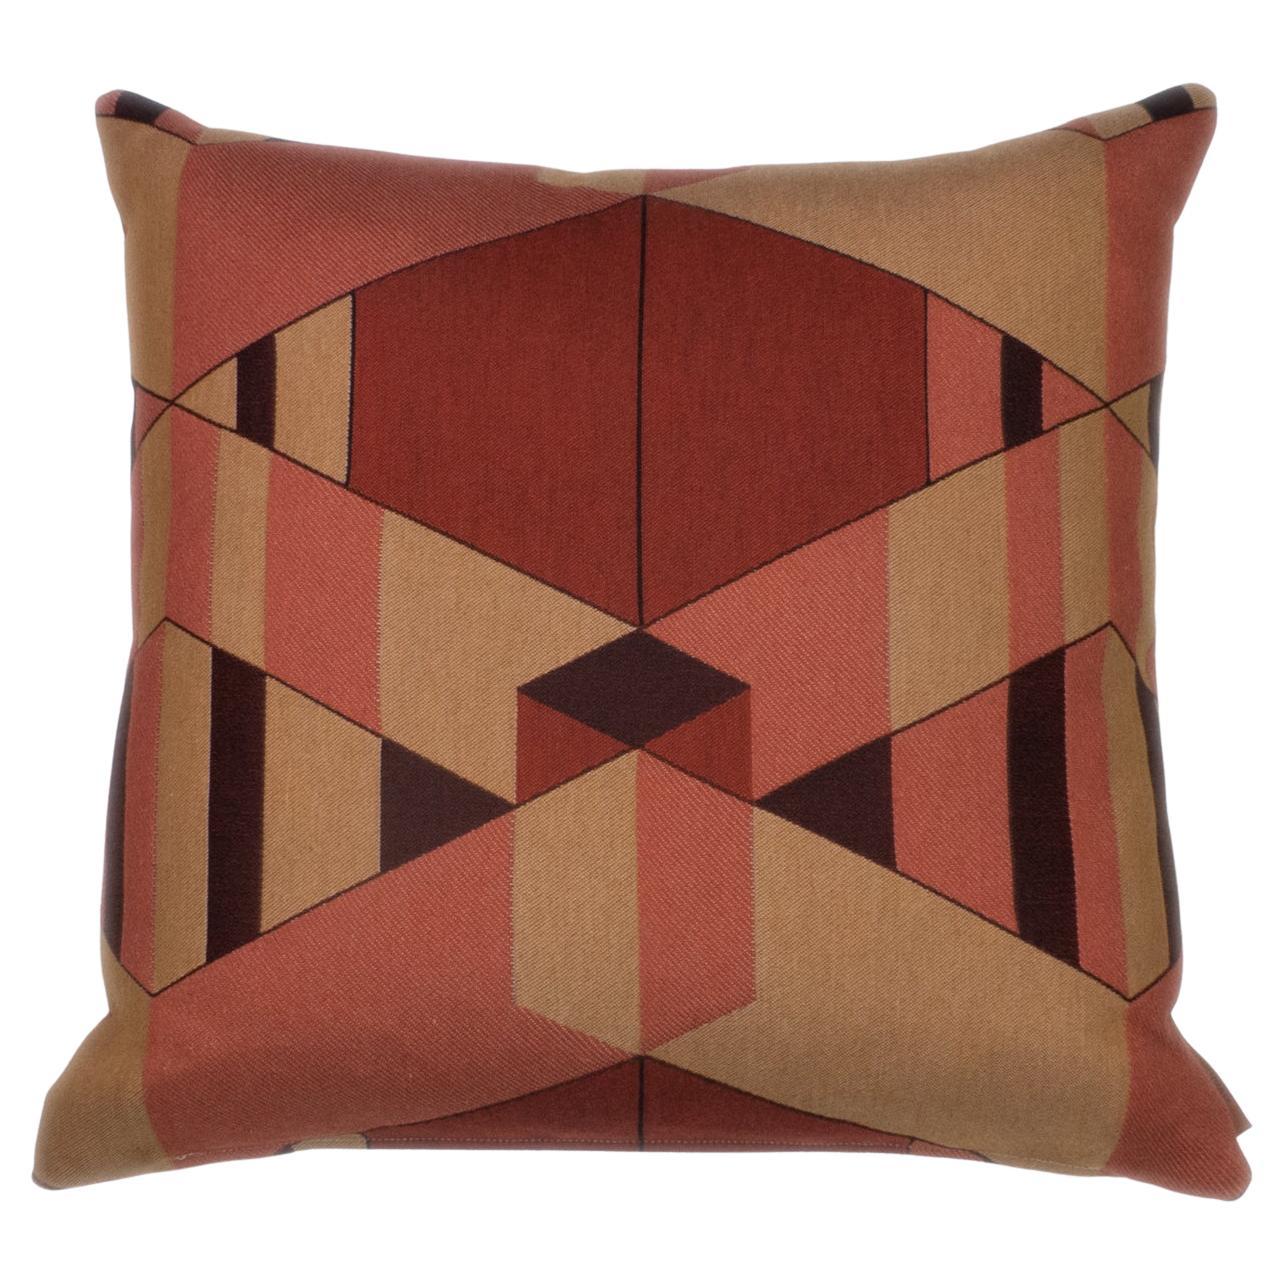 Cushion / Pattern Pillow Absolute Coup De Foudre Red by Evolution21 For Sale